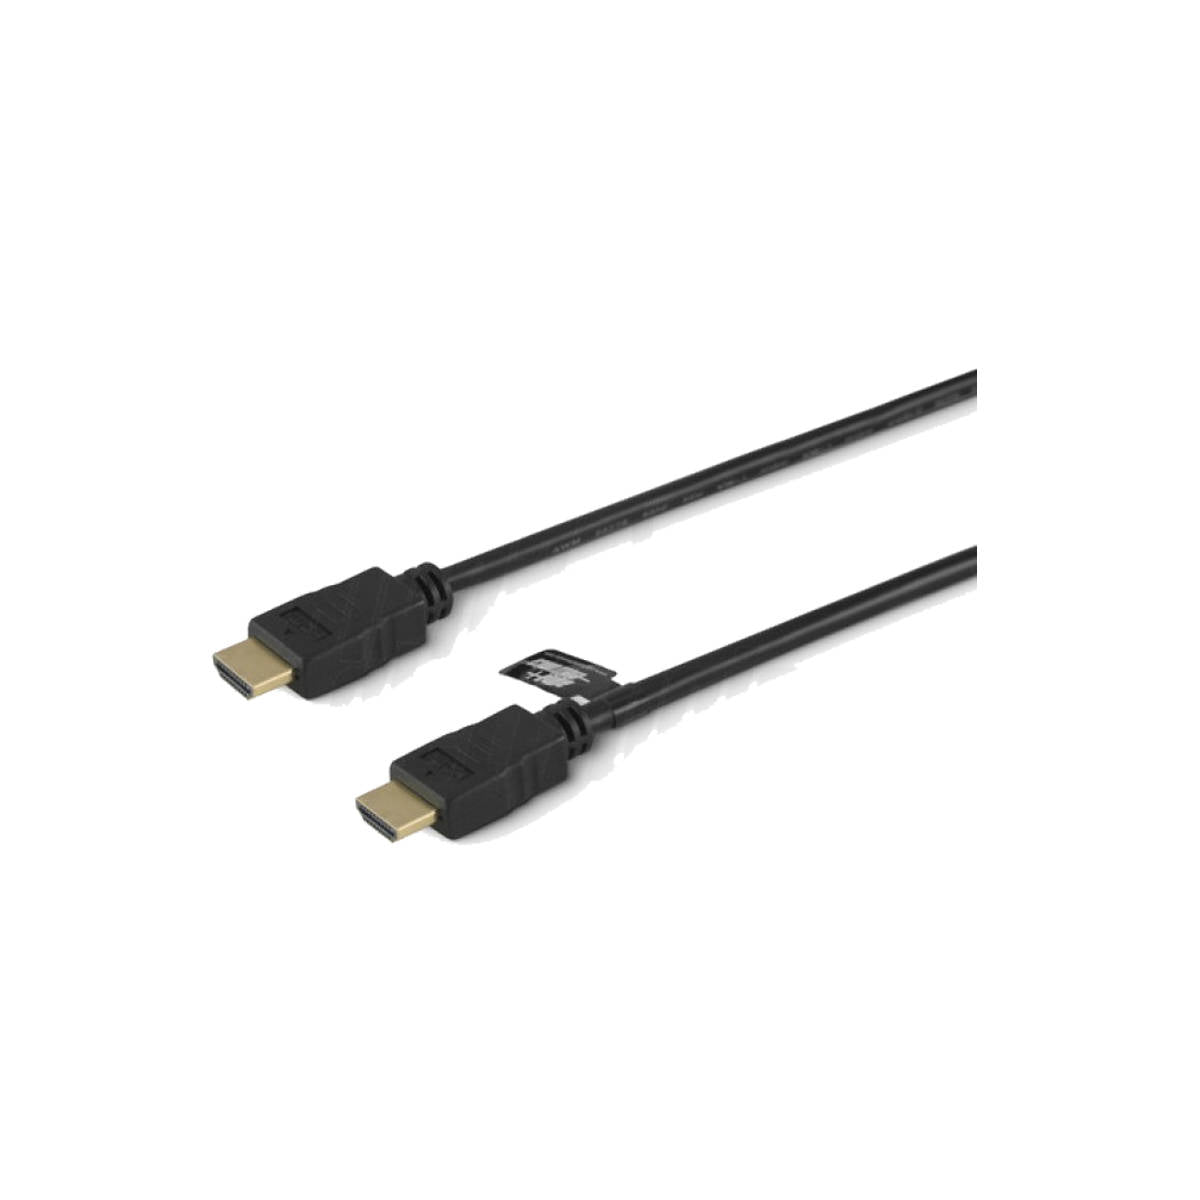 HDMI 2.0 4K Standard Cable 2mt High Speed with Ethernet, Black